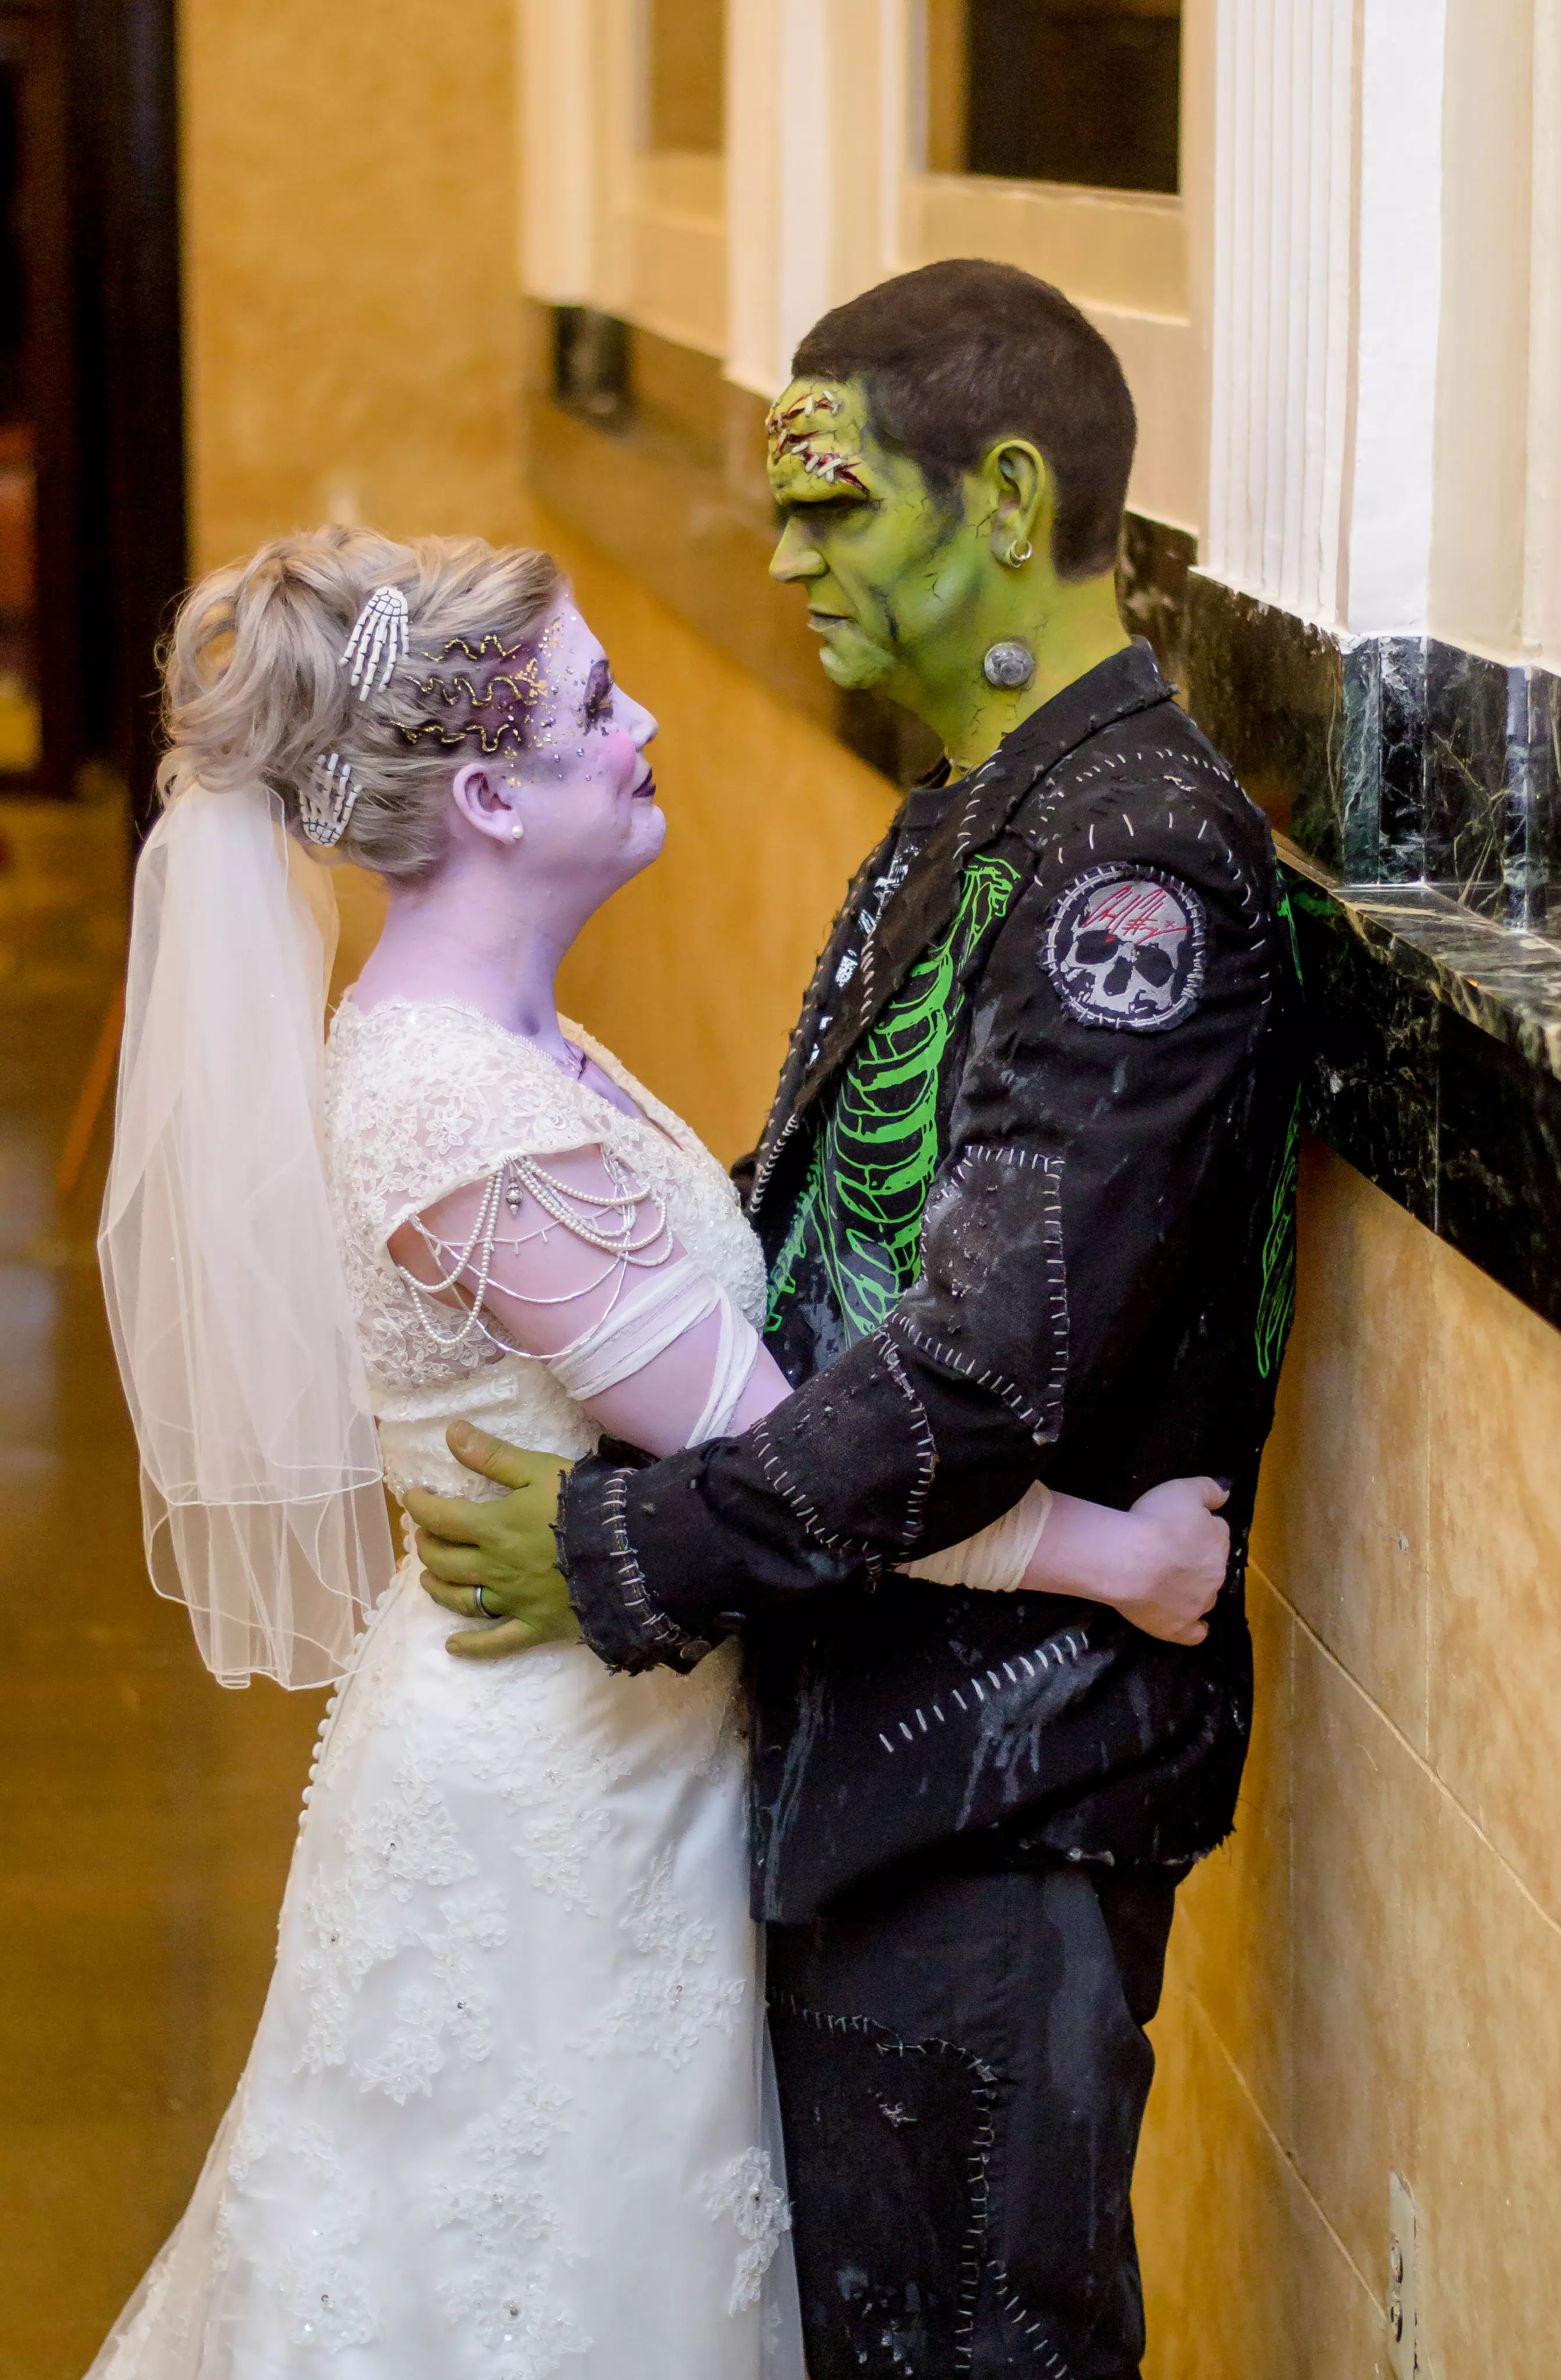 The horror make-up took so long, the couple were an hour late to their own wedding (